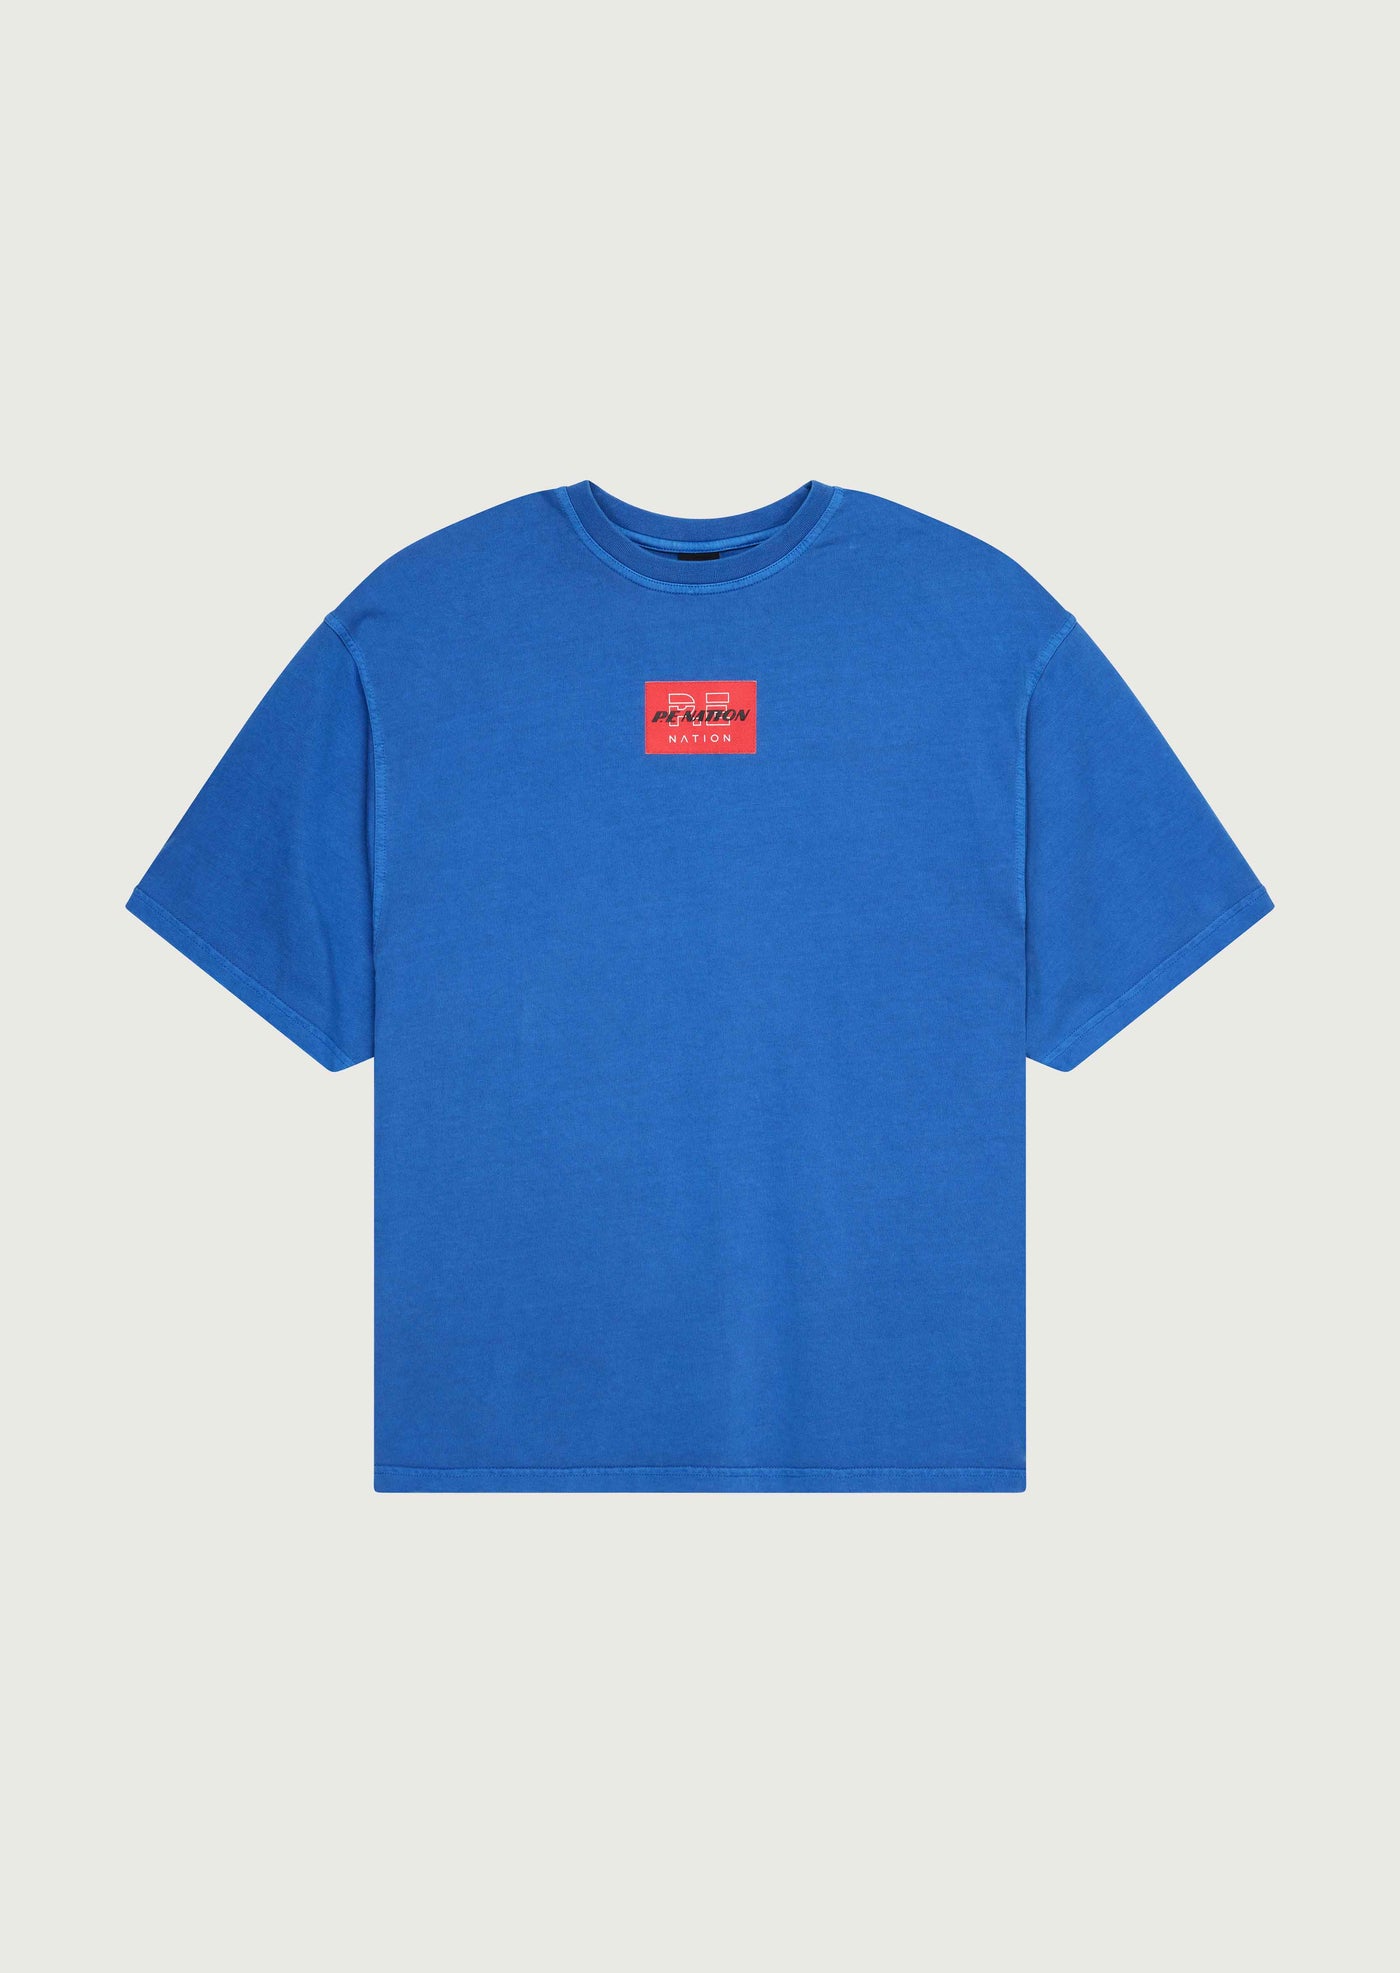 TRIFECTA TEE IN WASHED ELECTRIC BLUE